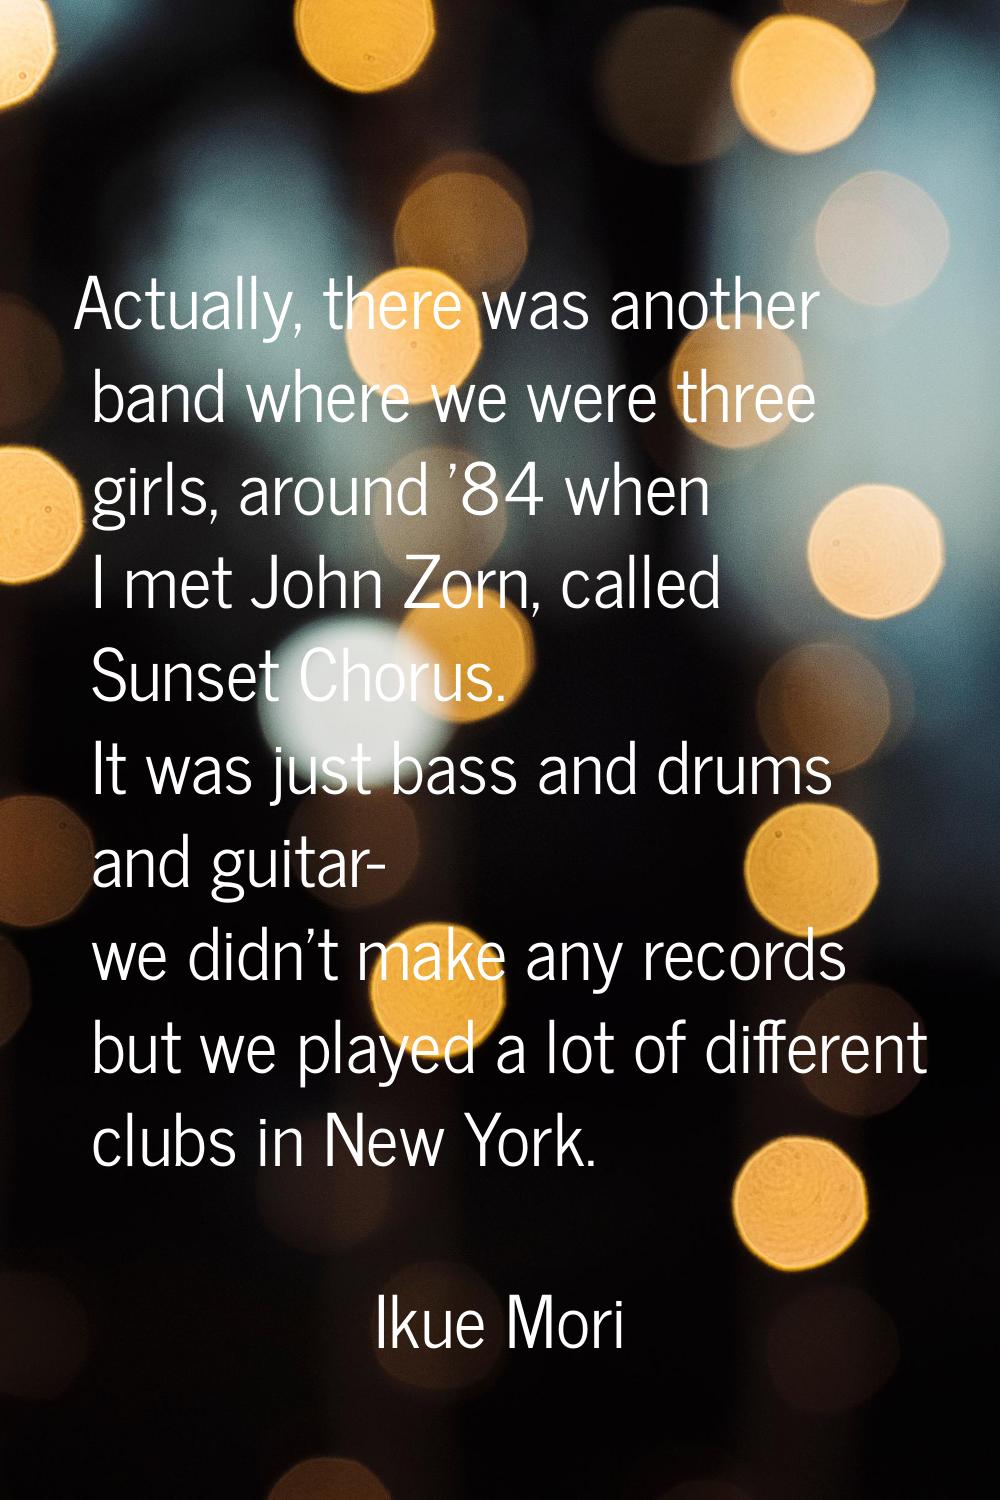 Actually, there was another band where we were three girls, around '84 when I met John Zorn, called